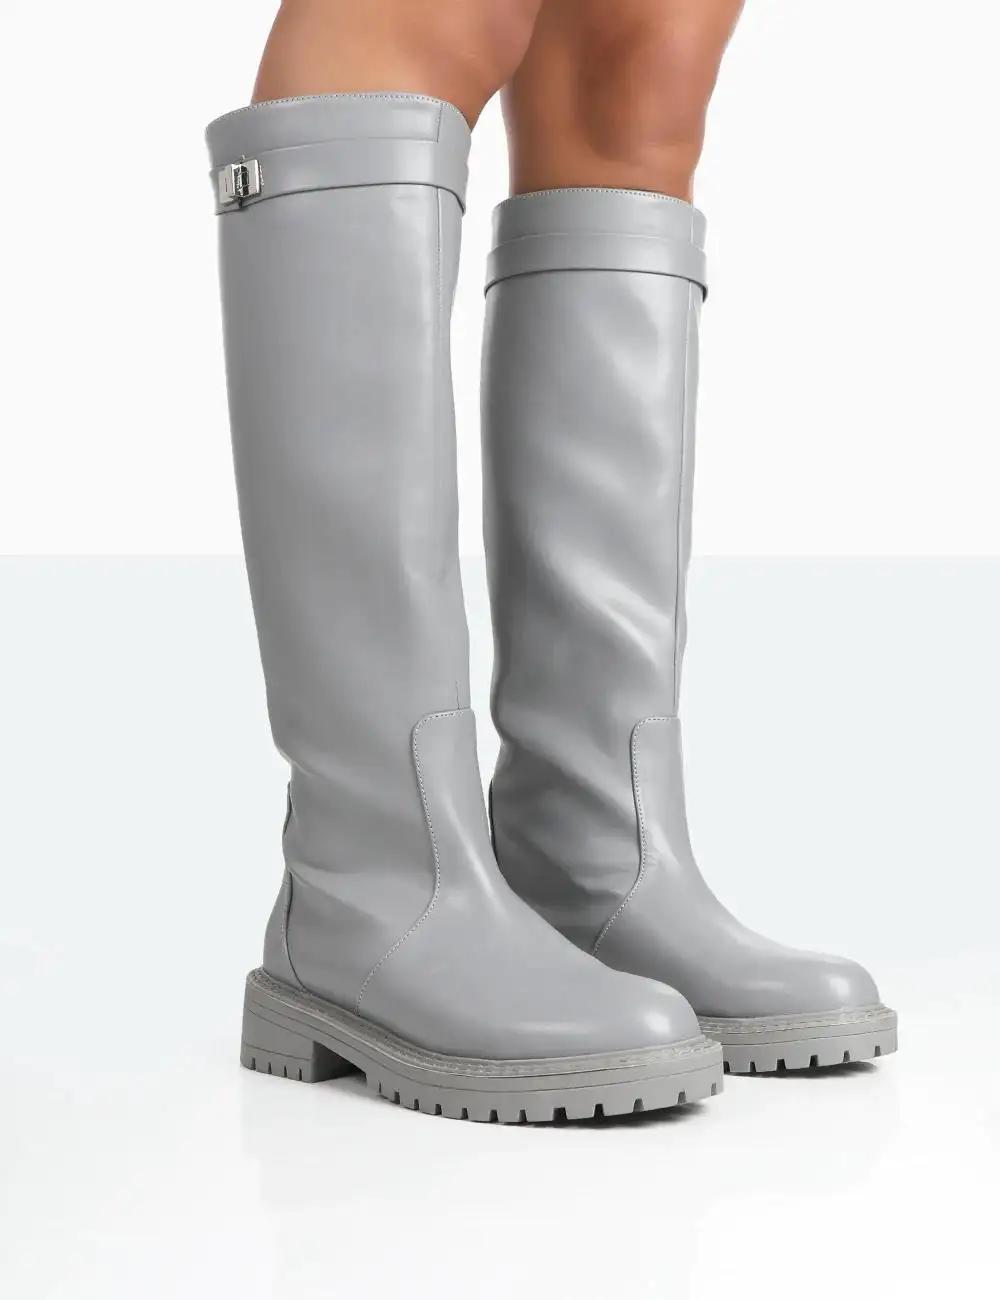 ROUND TOE CHUNKY SOLE KNEE HIGH LONG BOOTS IN GREY FAUX LEATHER FOR WOMEN AND LADDIES fashion ladies boots luxury boots